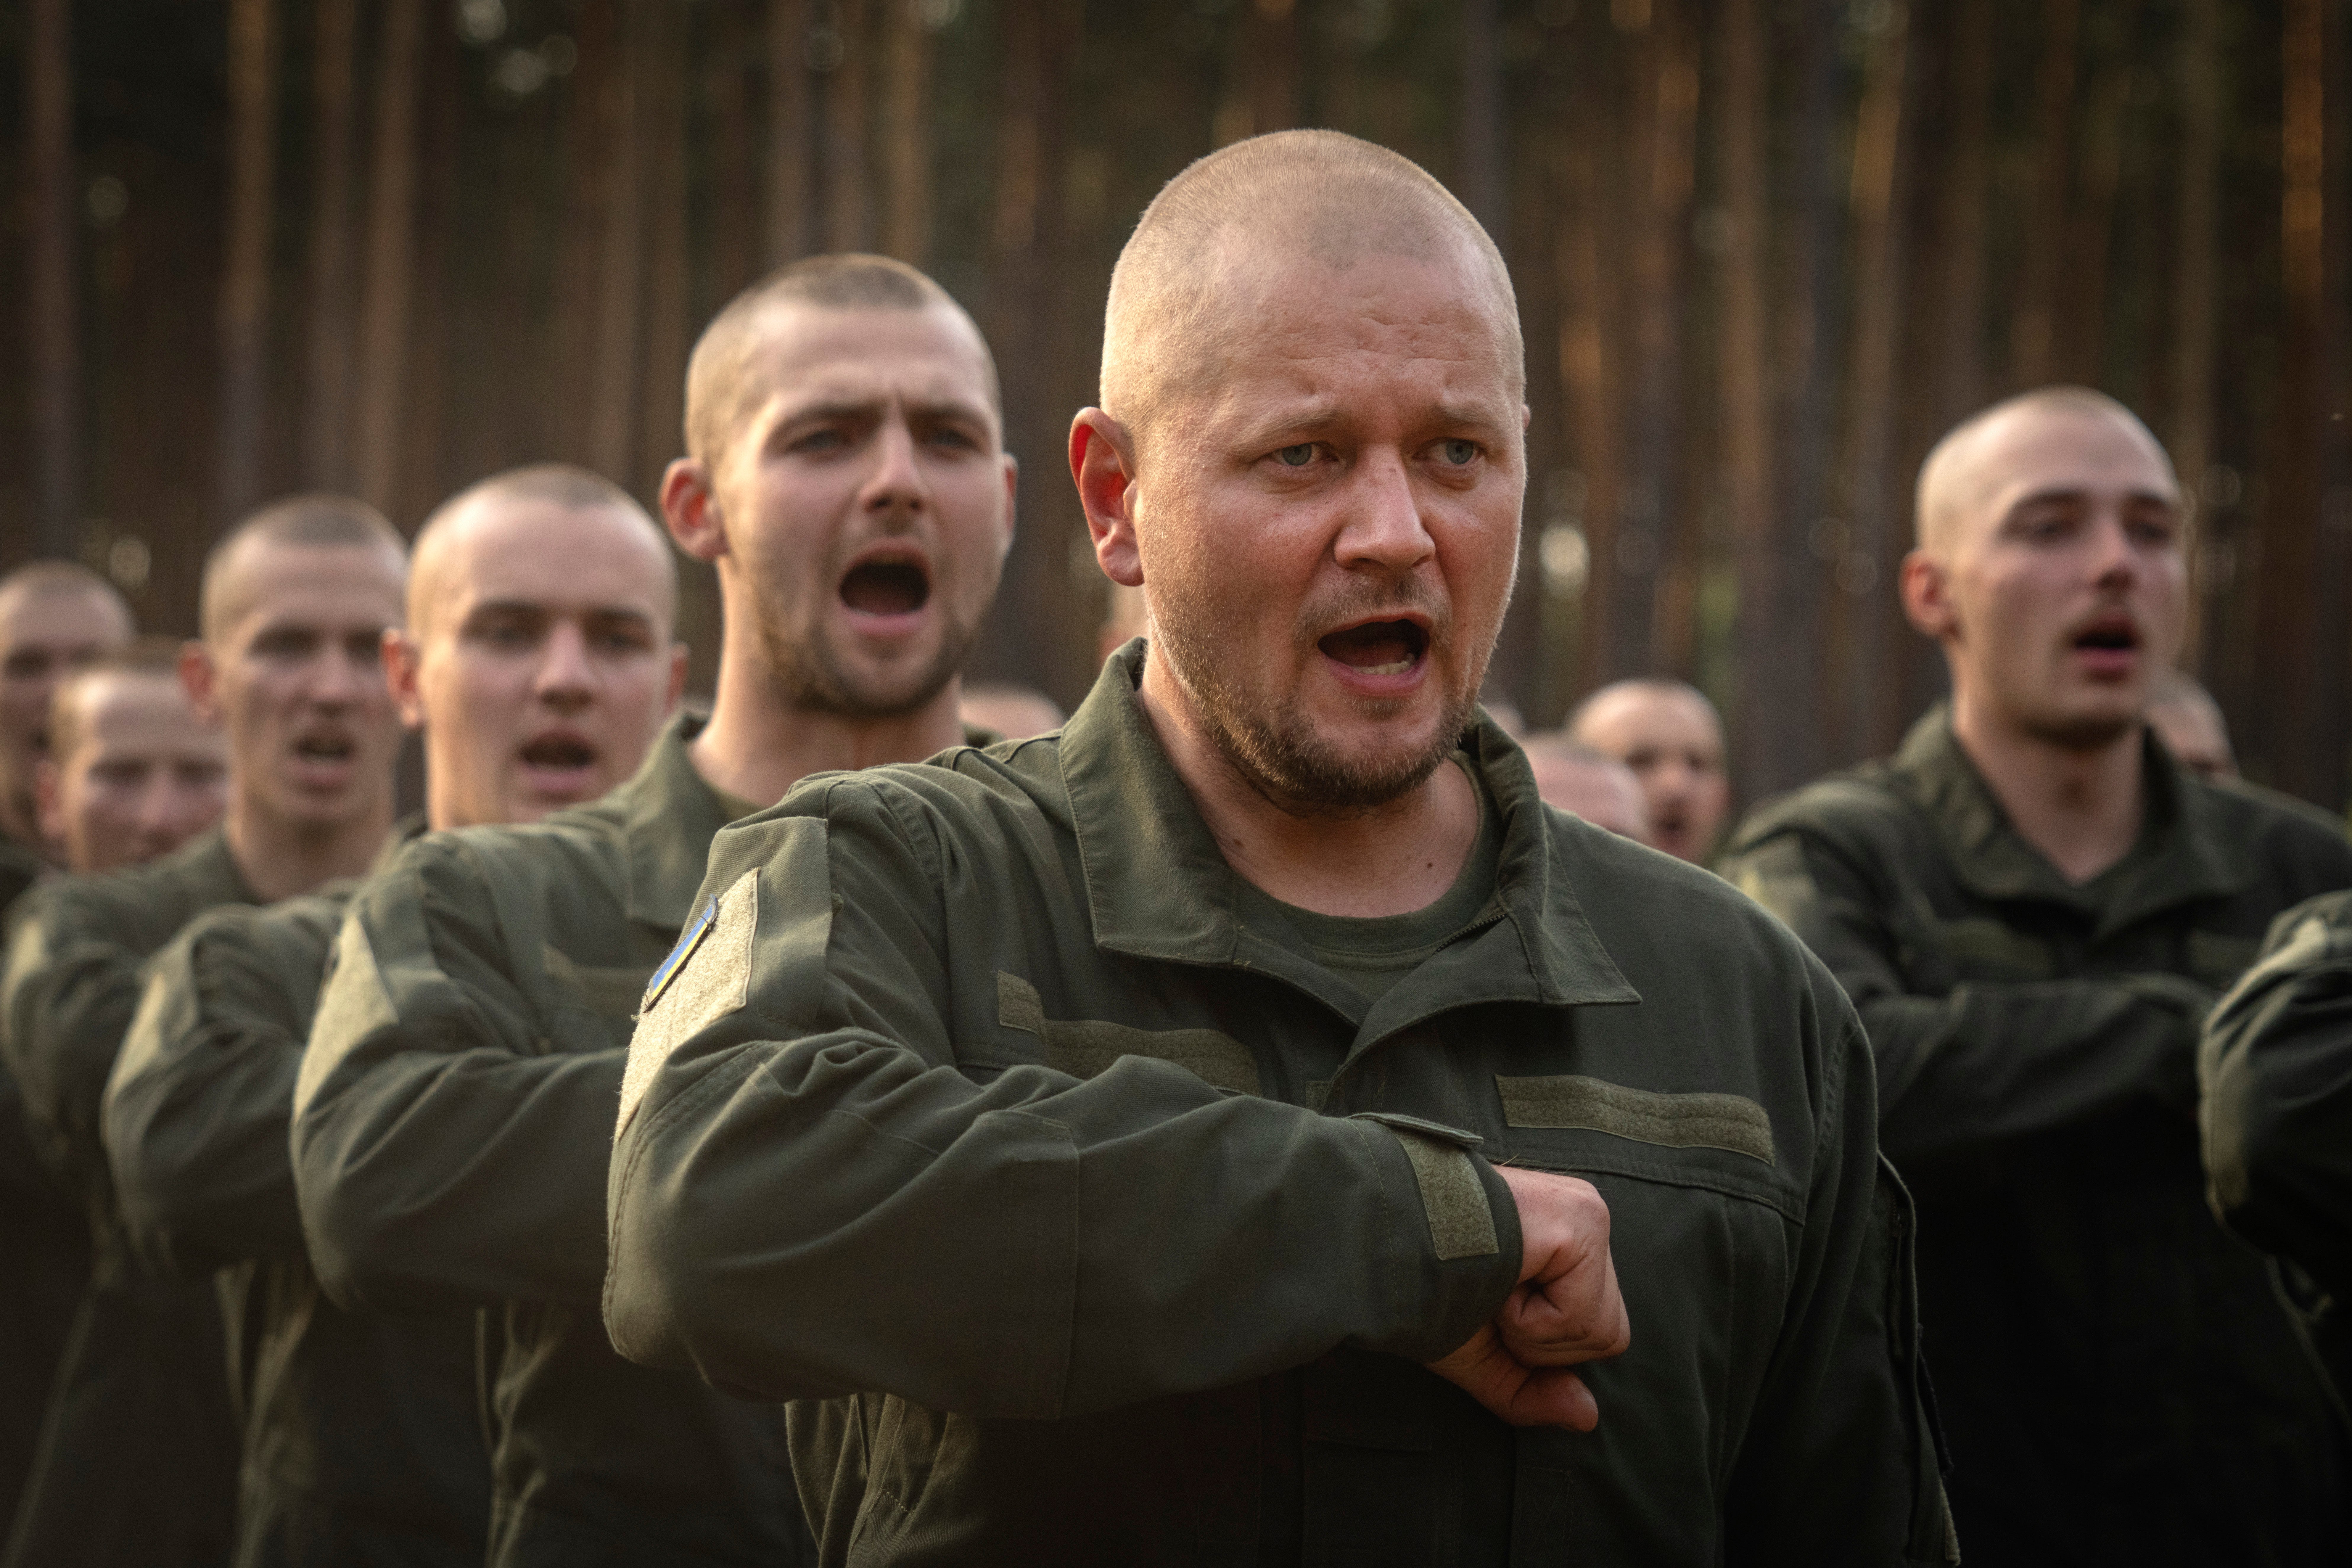 Newly recruited soldiers toss their hats as they celebrate the end of their training at a military base close to Kyiv